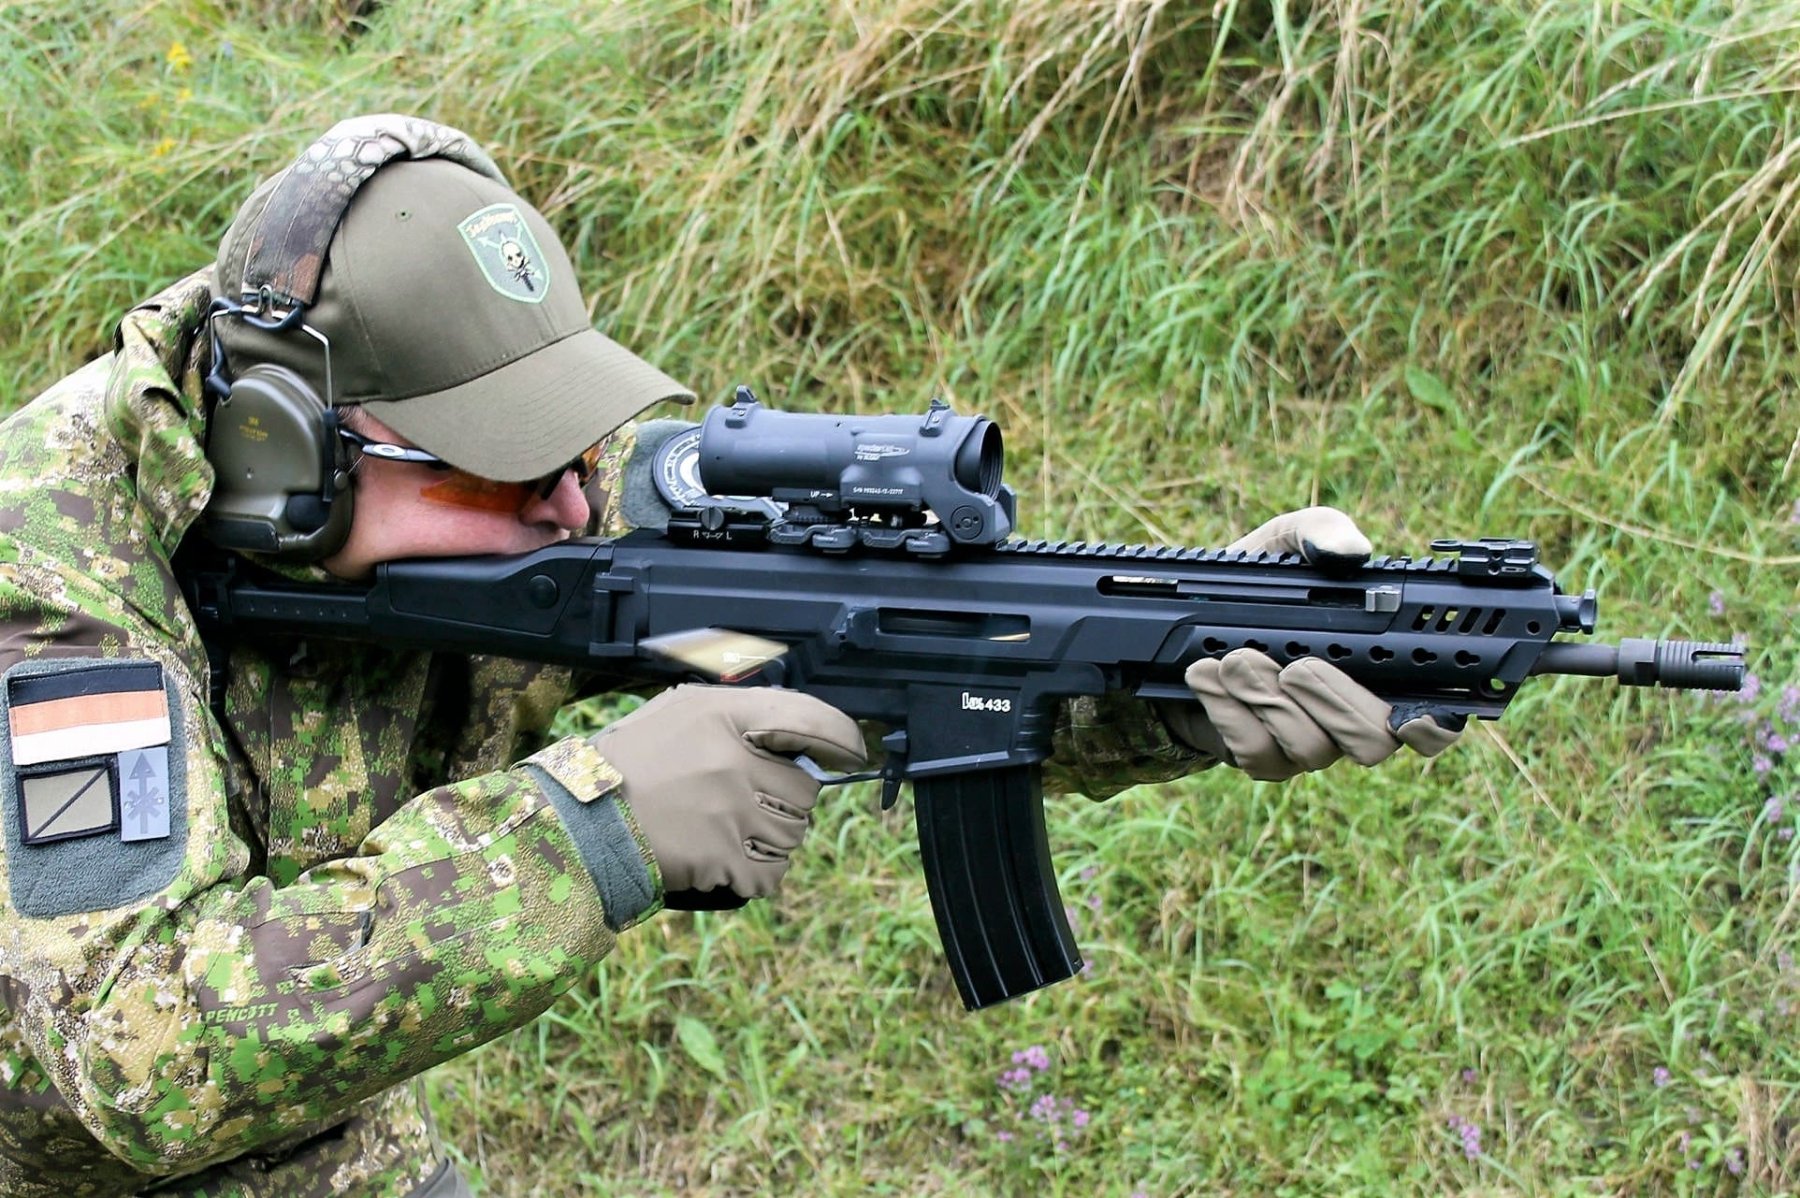 Shooting with an earlier version of the HK433